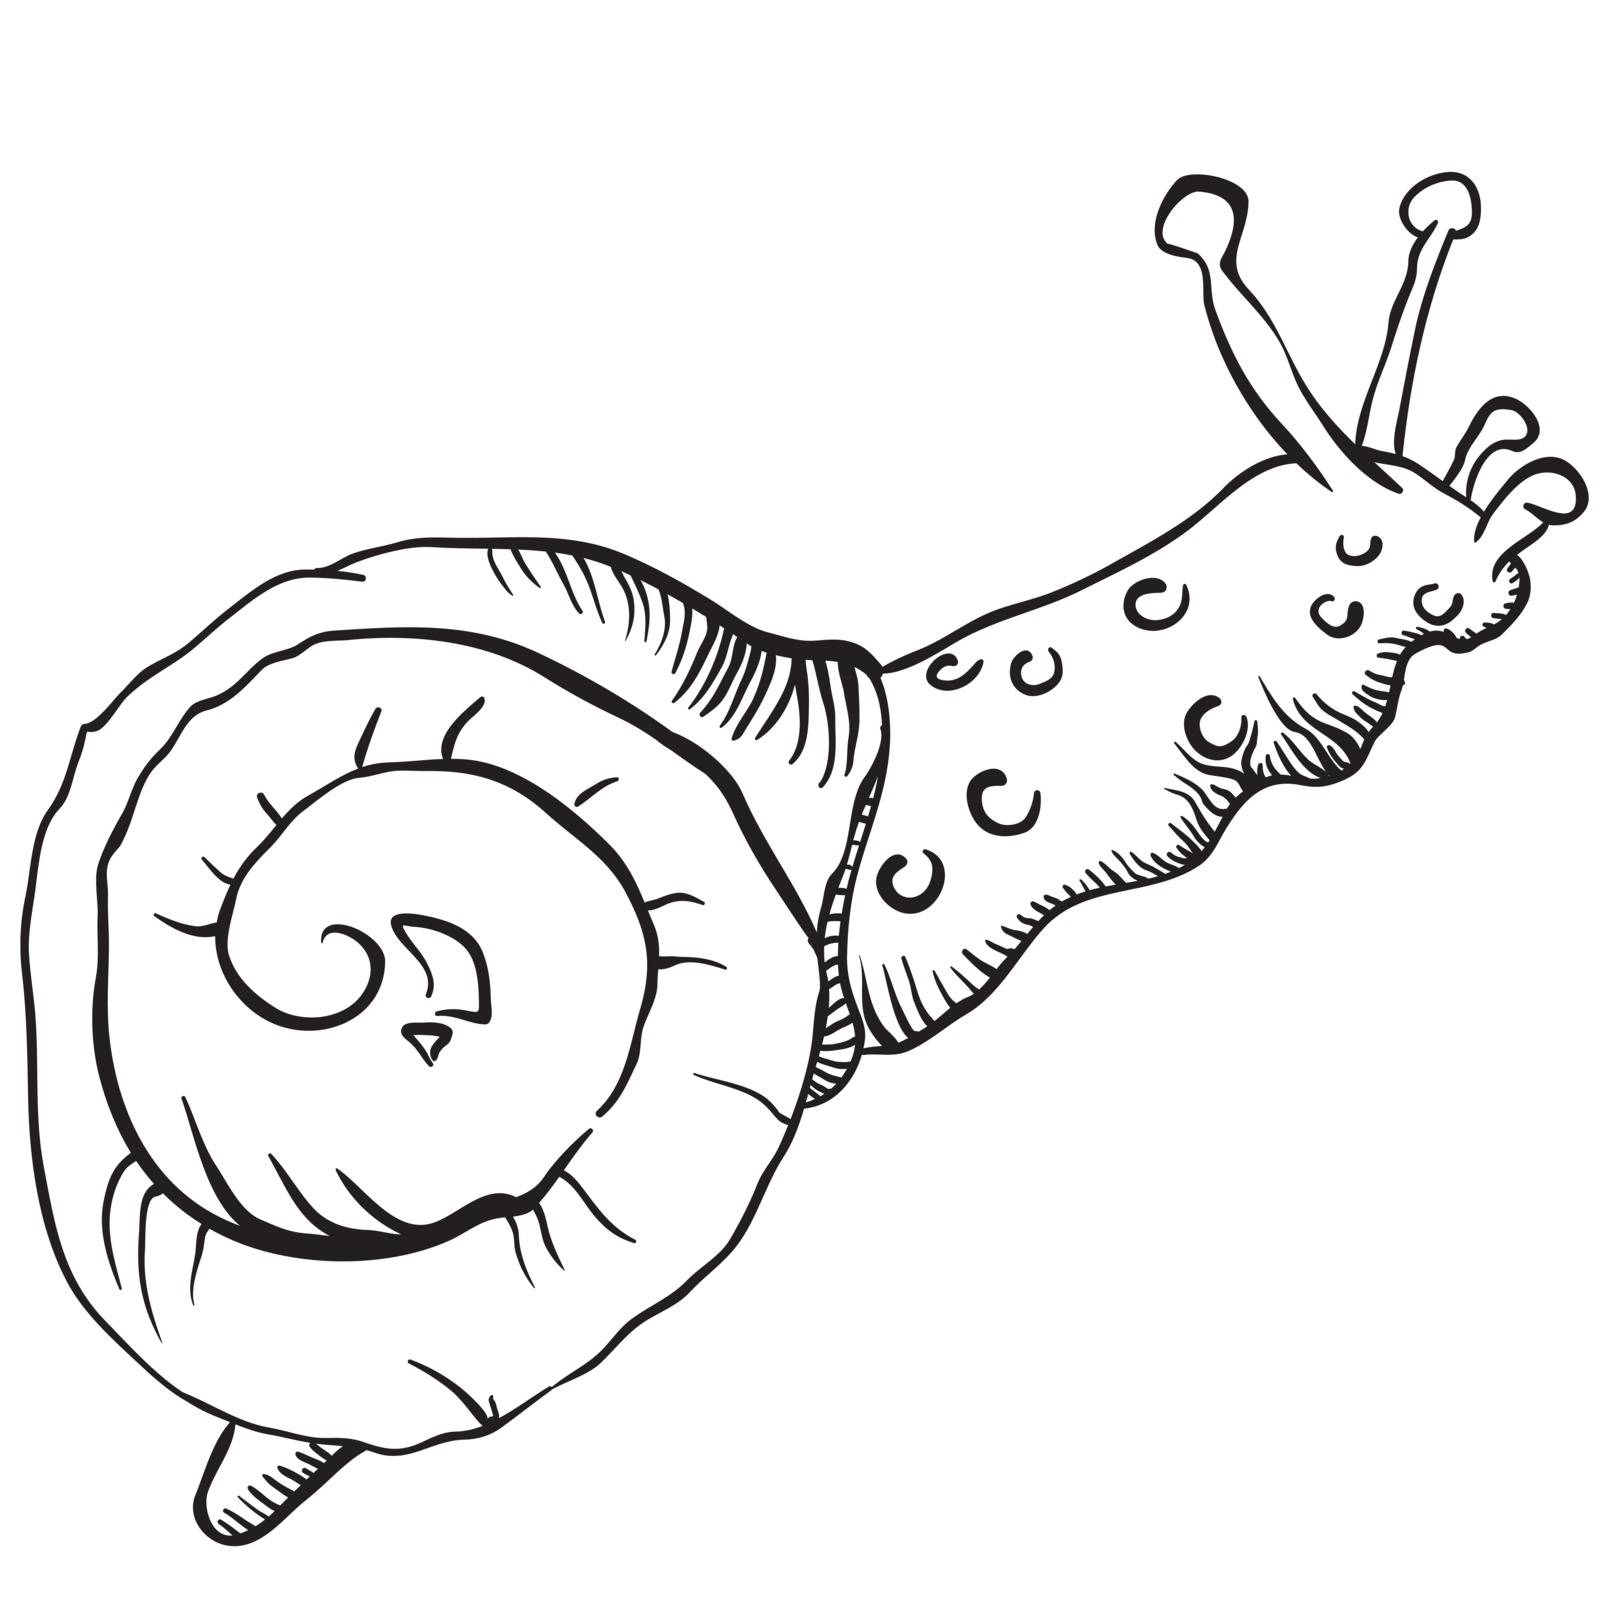 snail black and white drawing